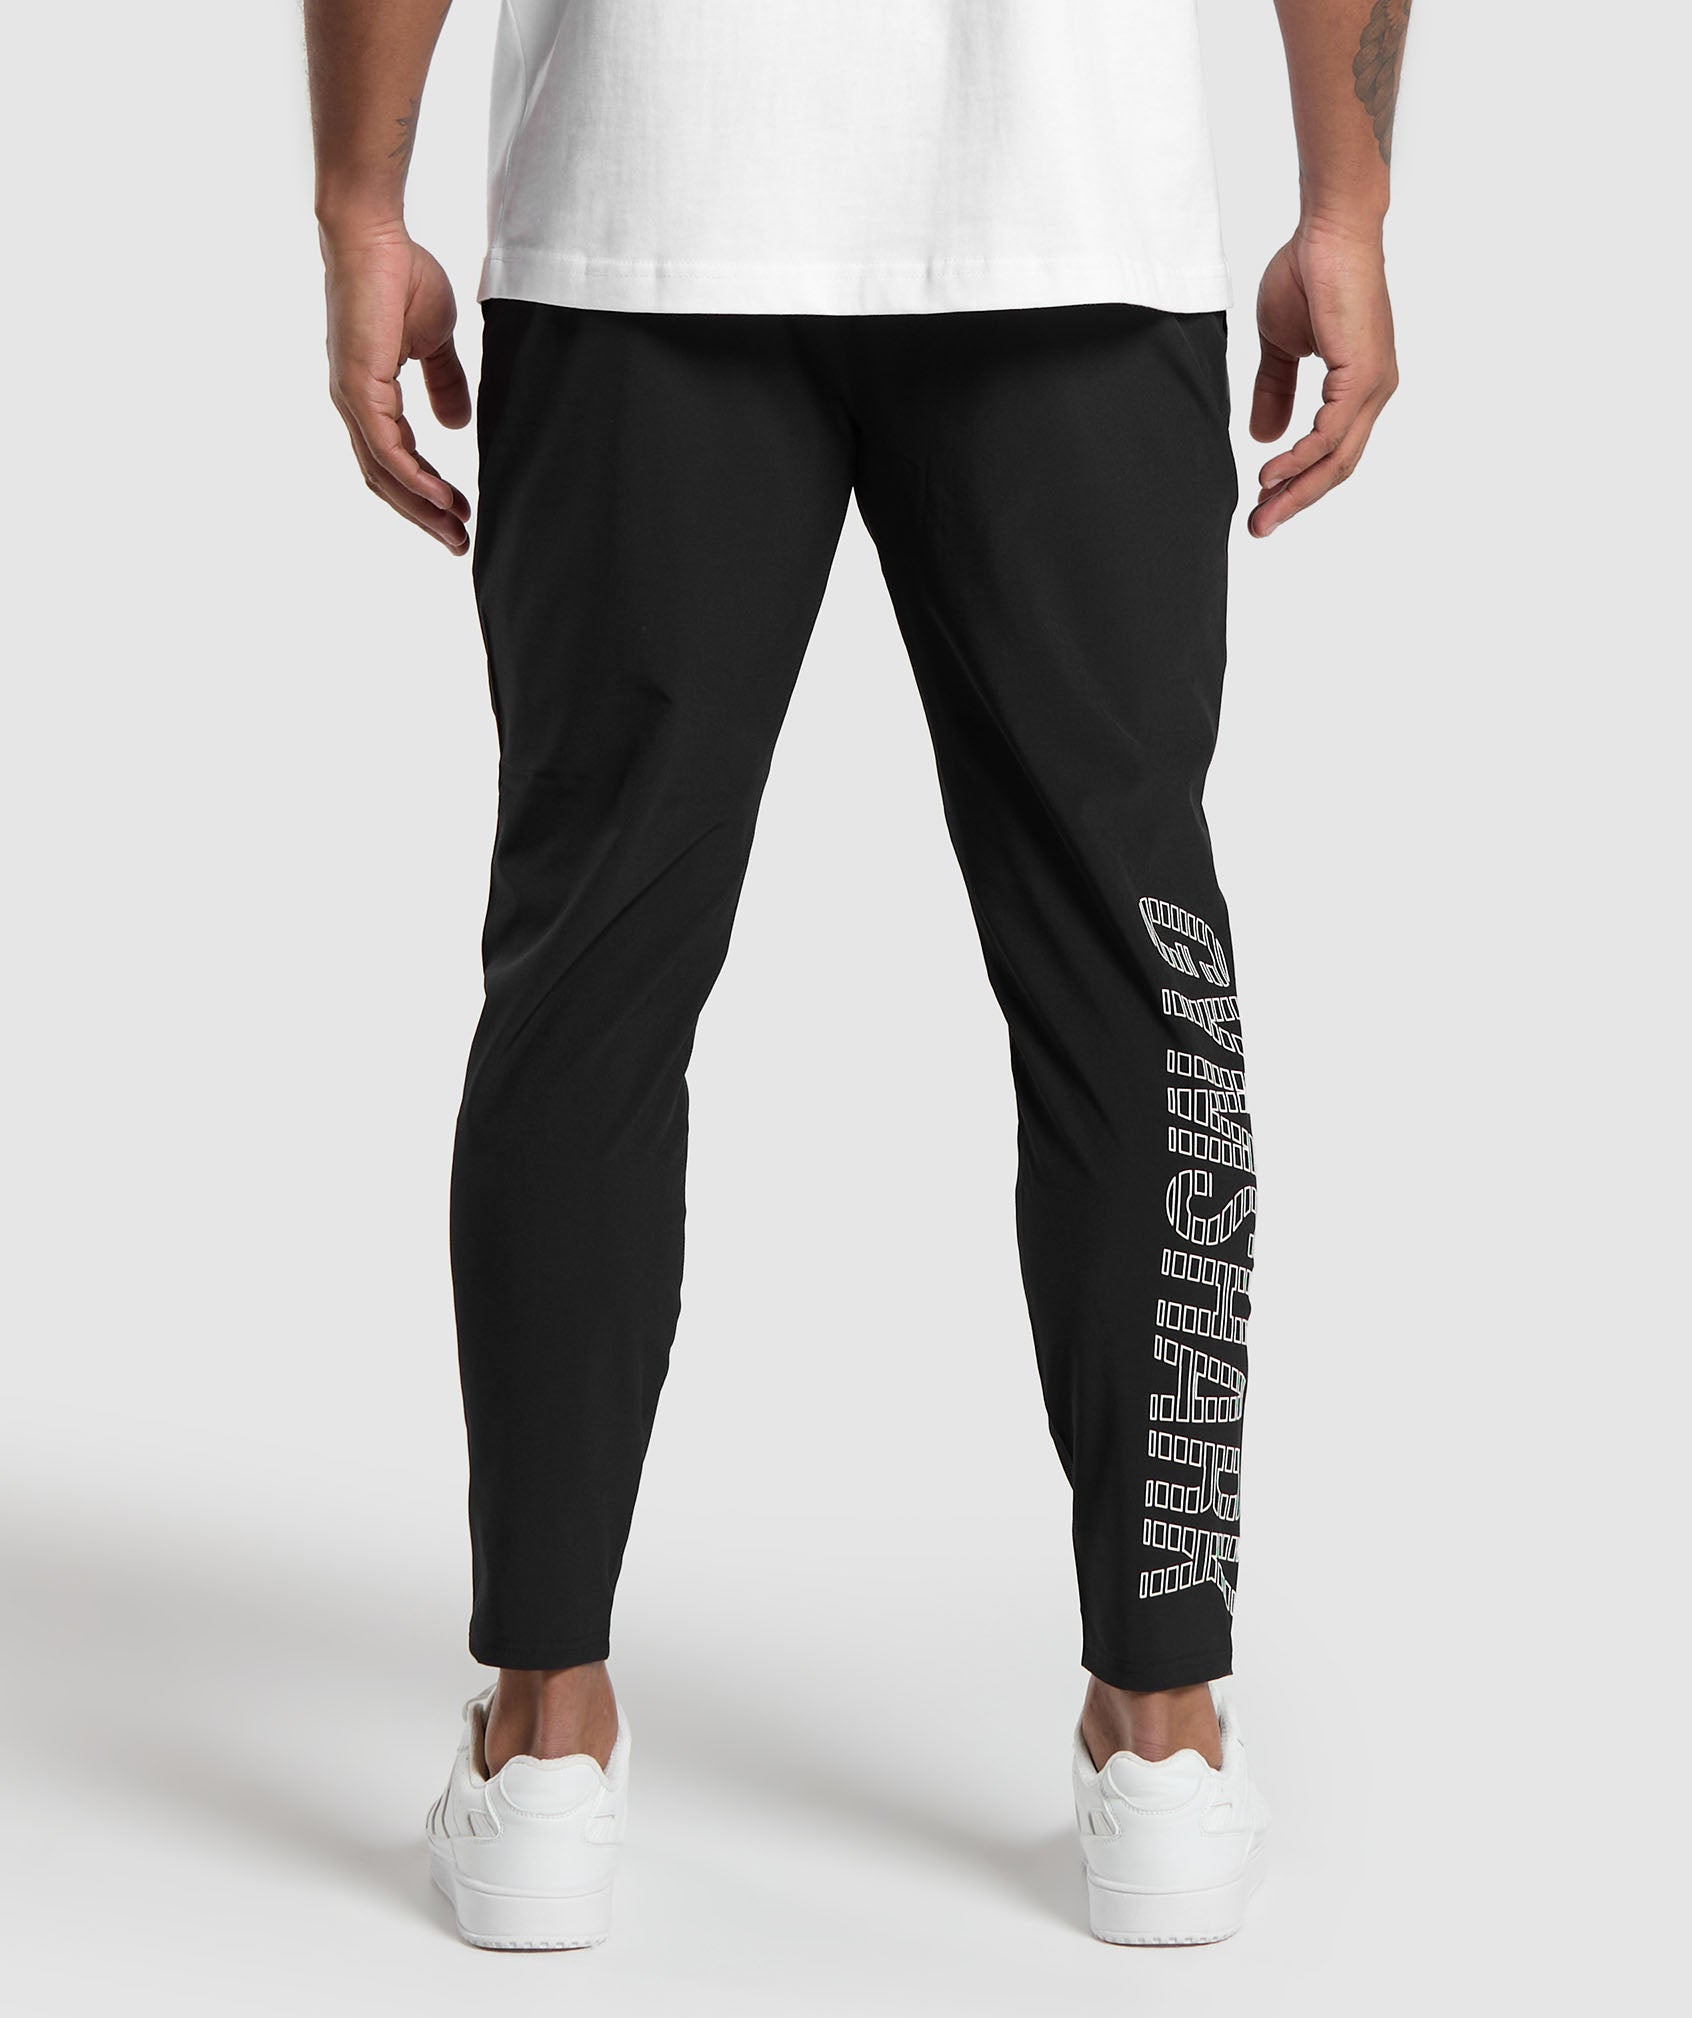 Conditioning Goods Woven Joggers in Black - view 2